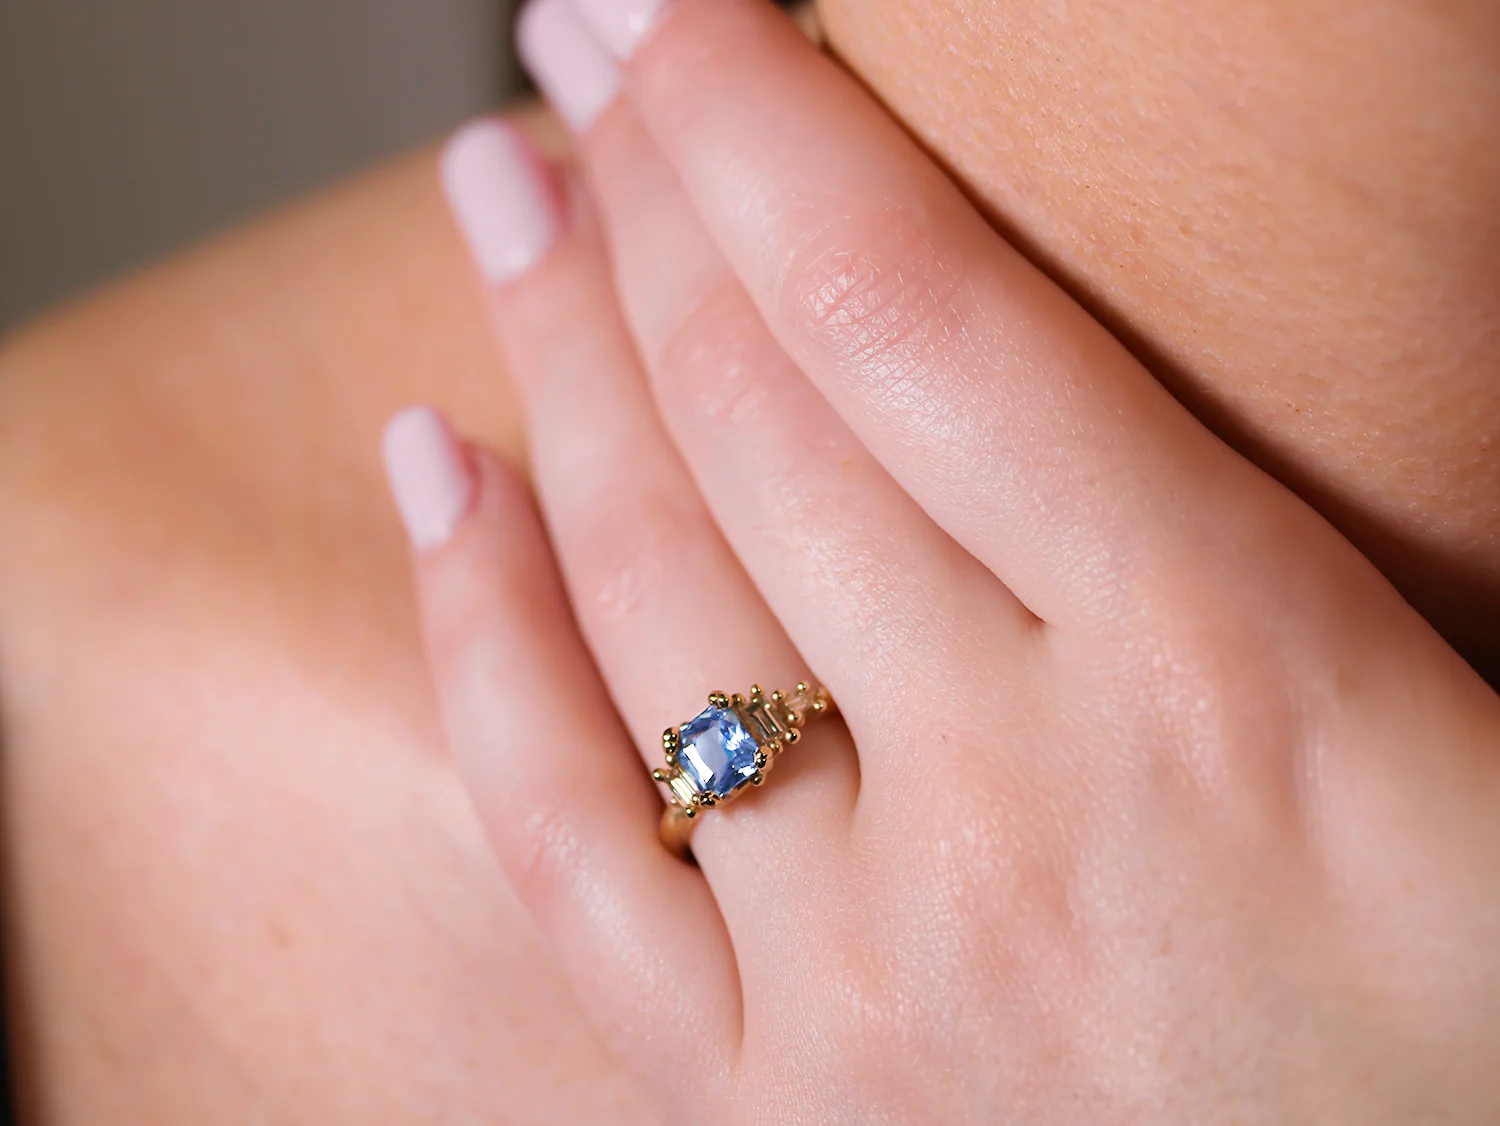 Blue Sapphire Engagement Ring: Princess Diana Engagement Ring